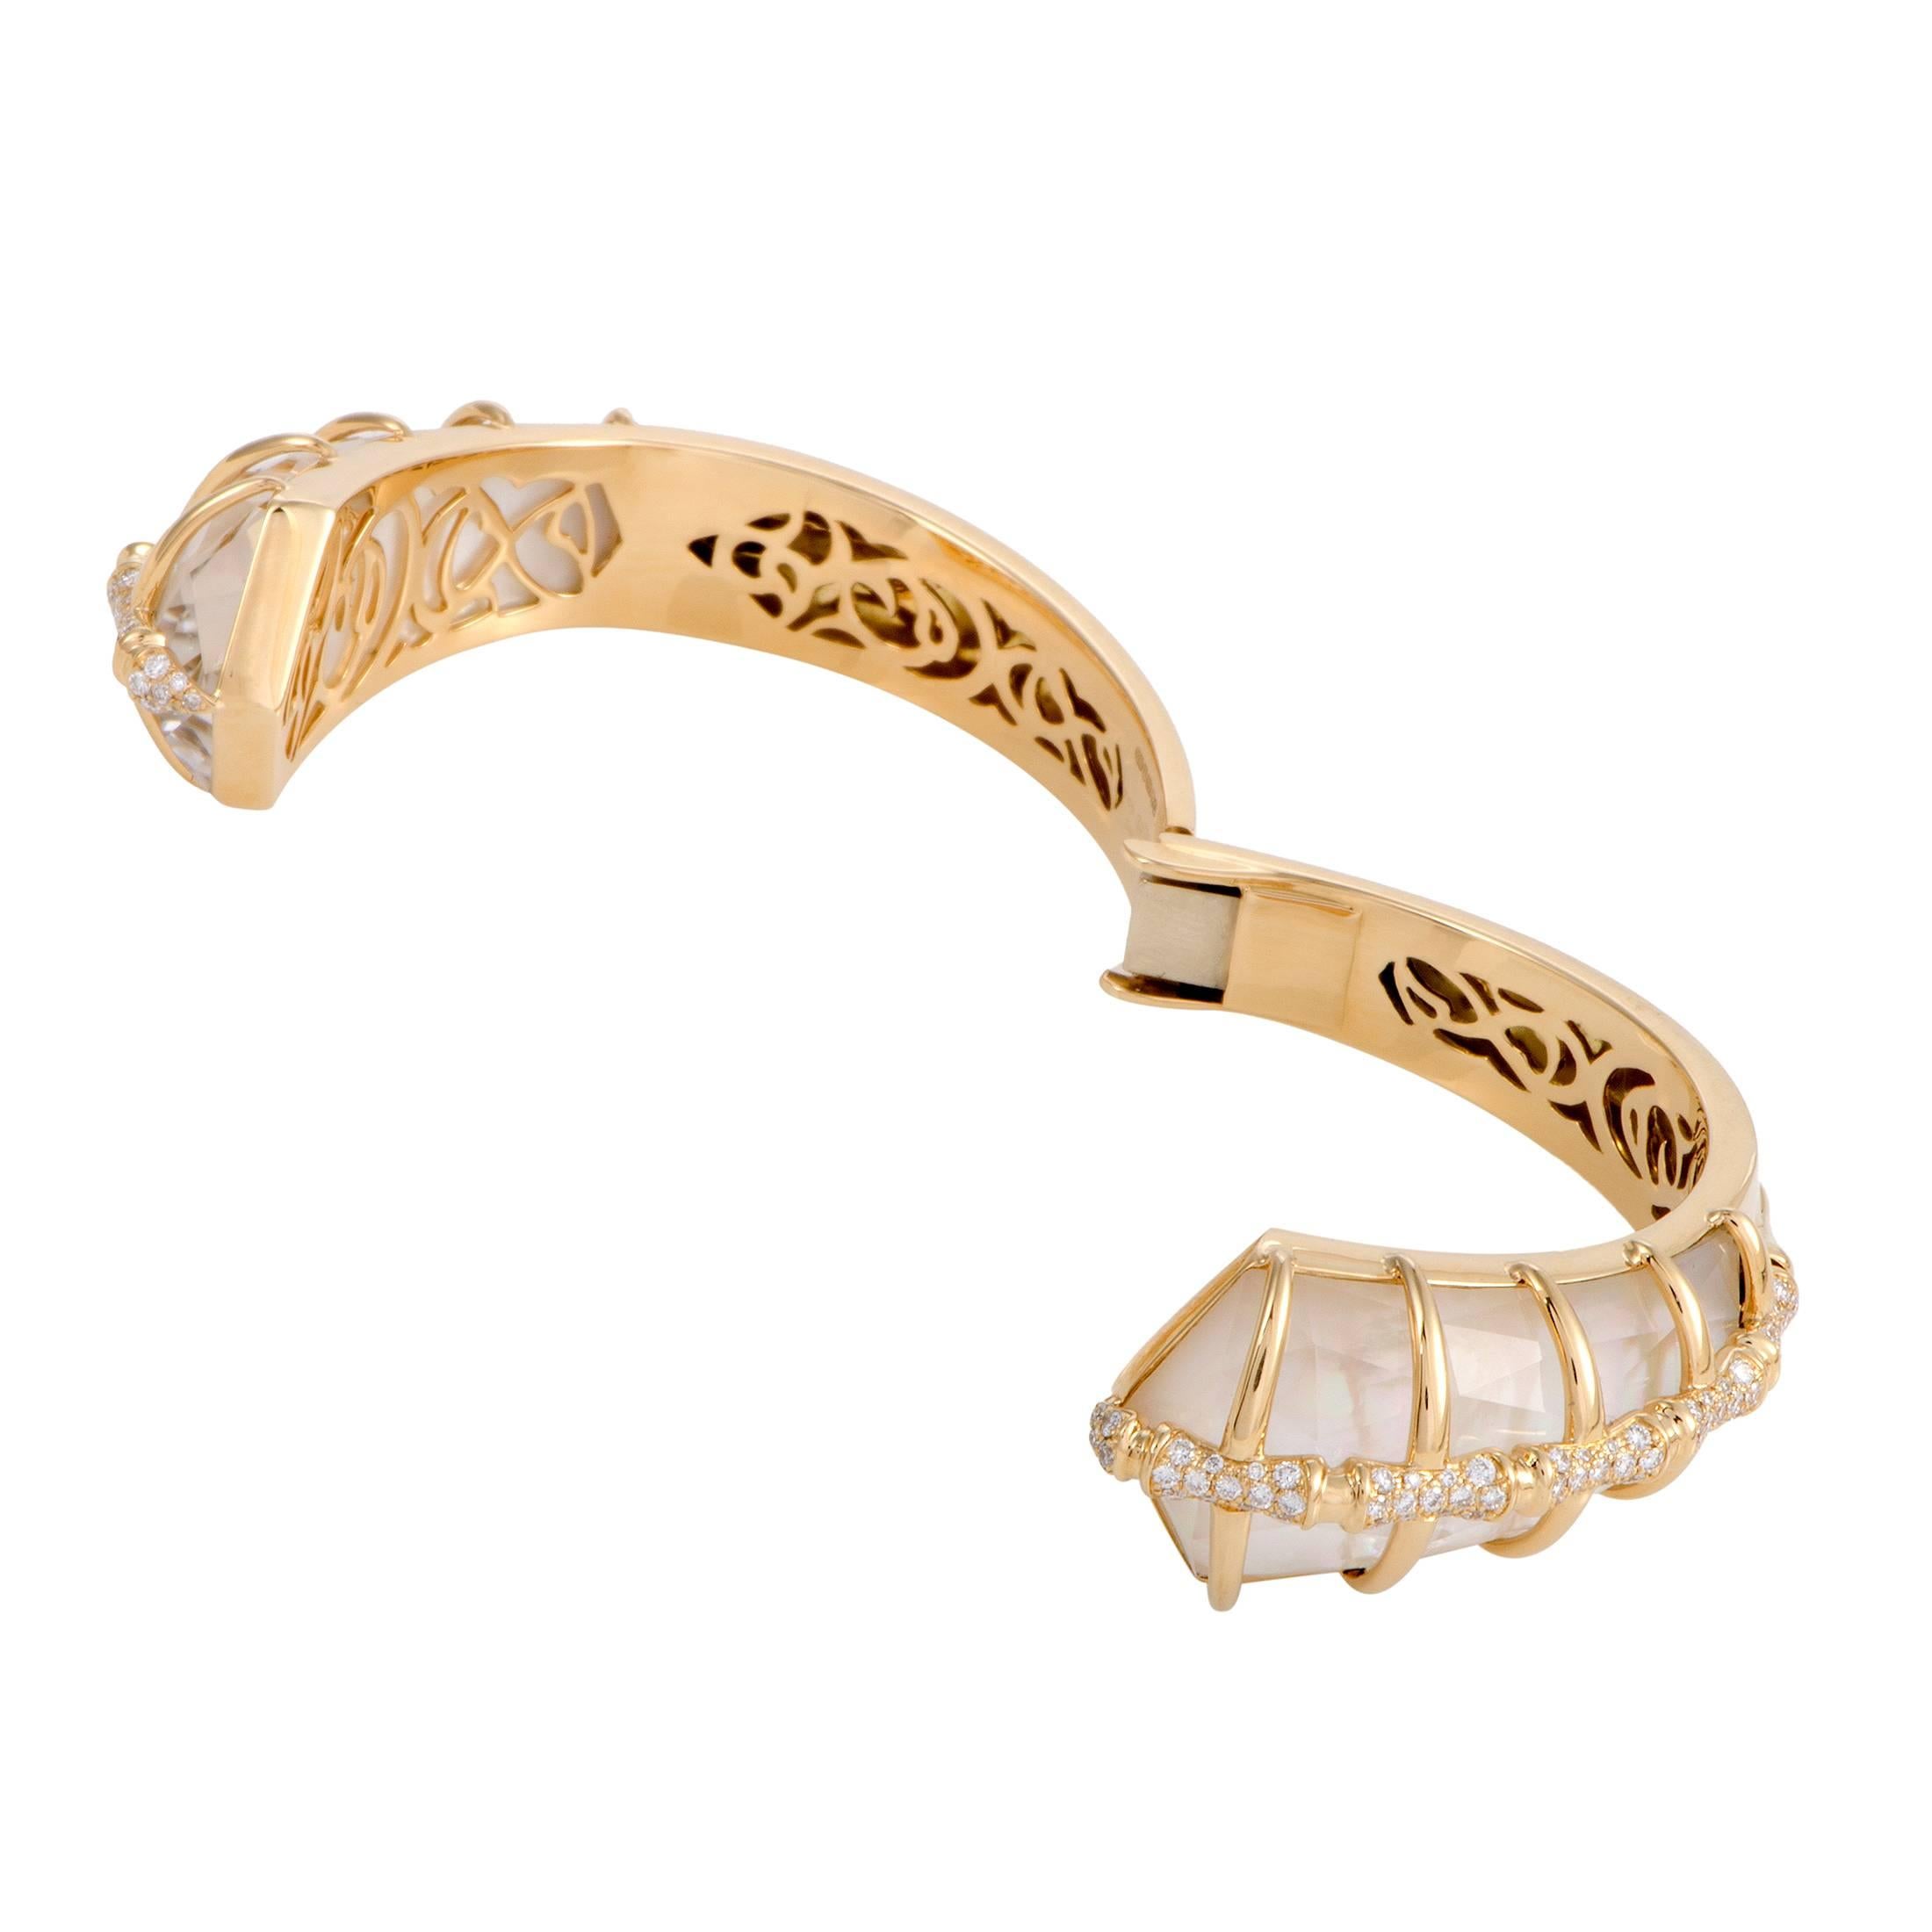 Women's Stephen Webster Jewels Verne Diamond Mother-of-Pearl and Quartz Gold Bangle